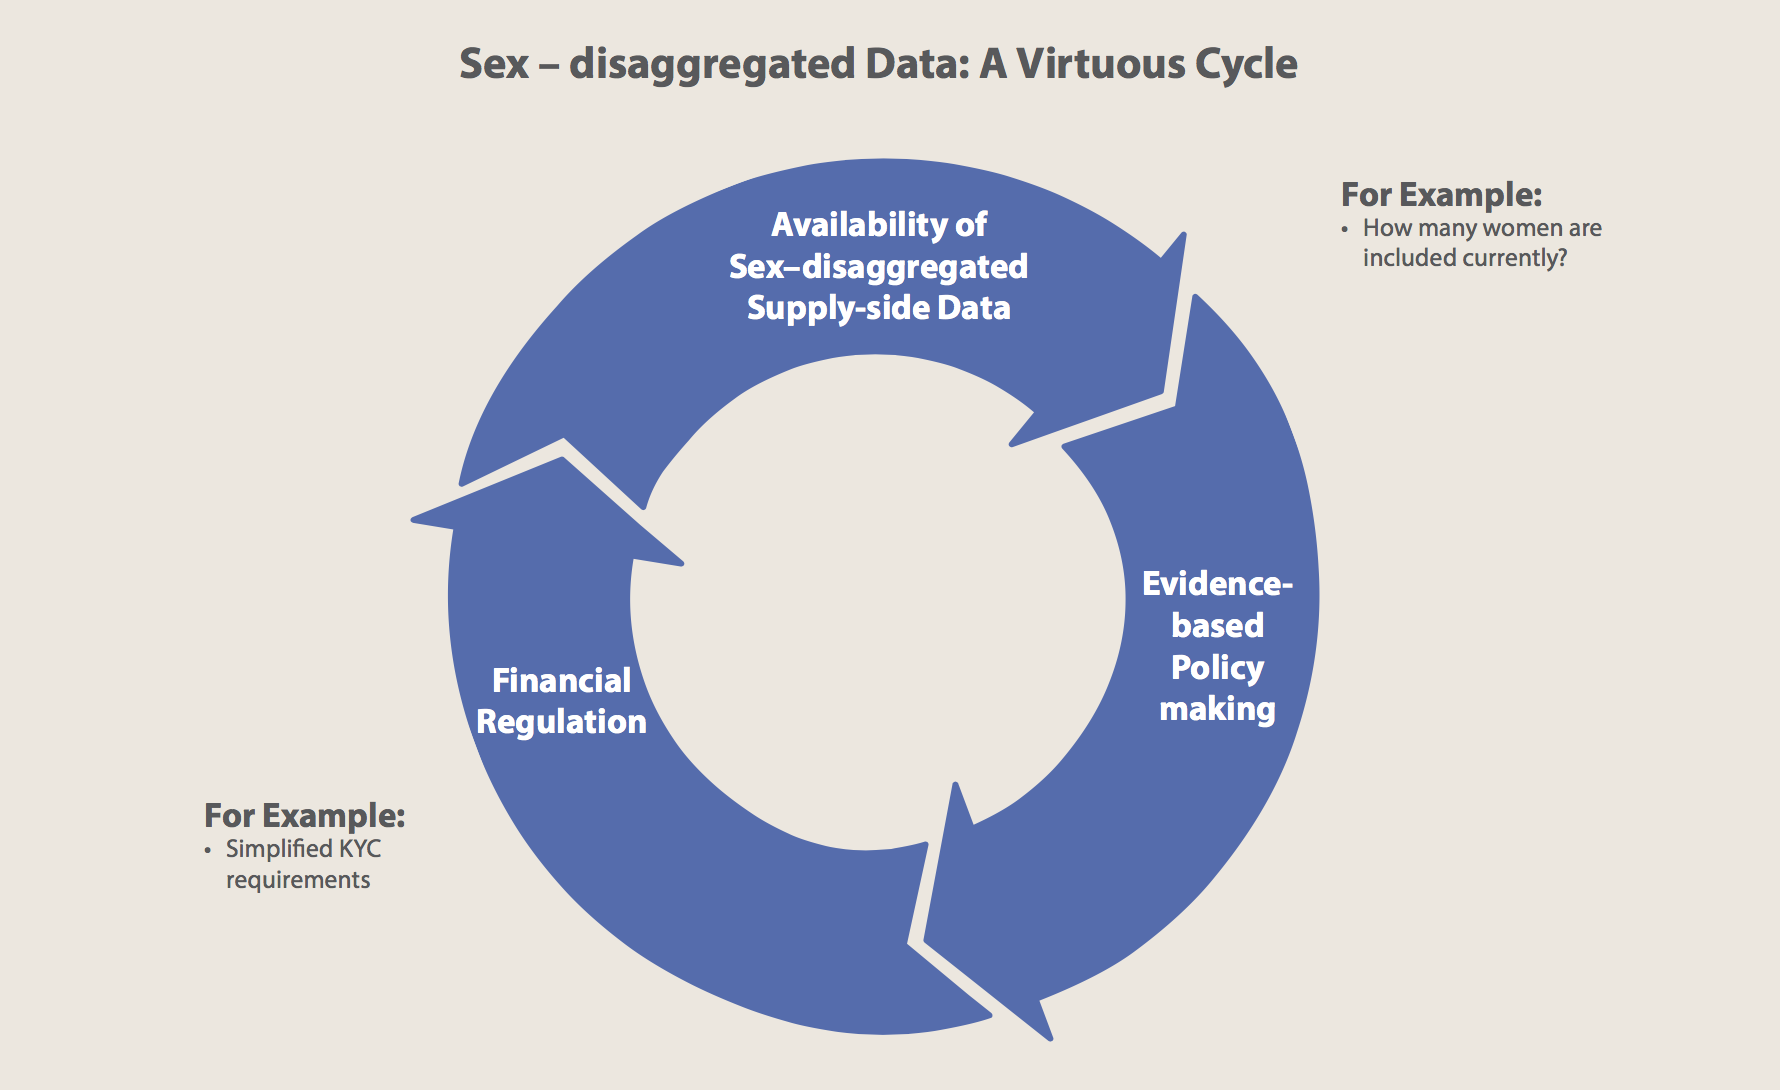 Virtuous Cycle of Sex-Disaggregated Data